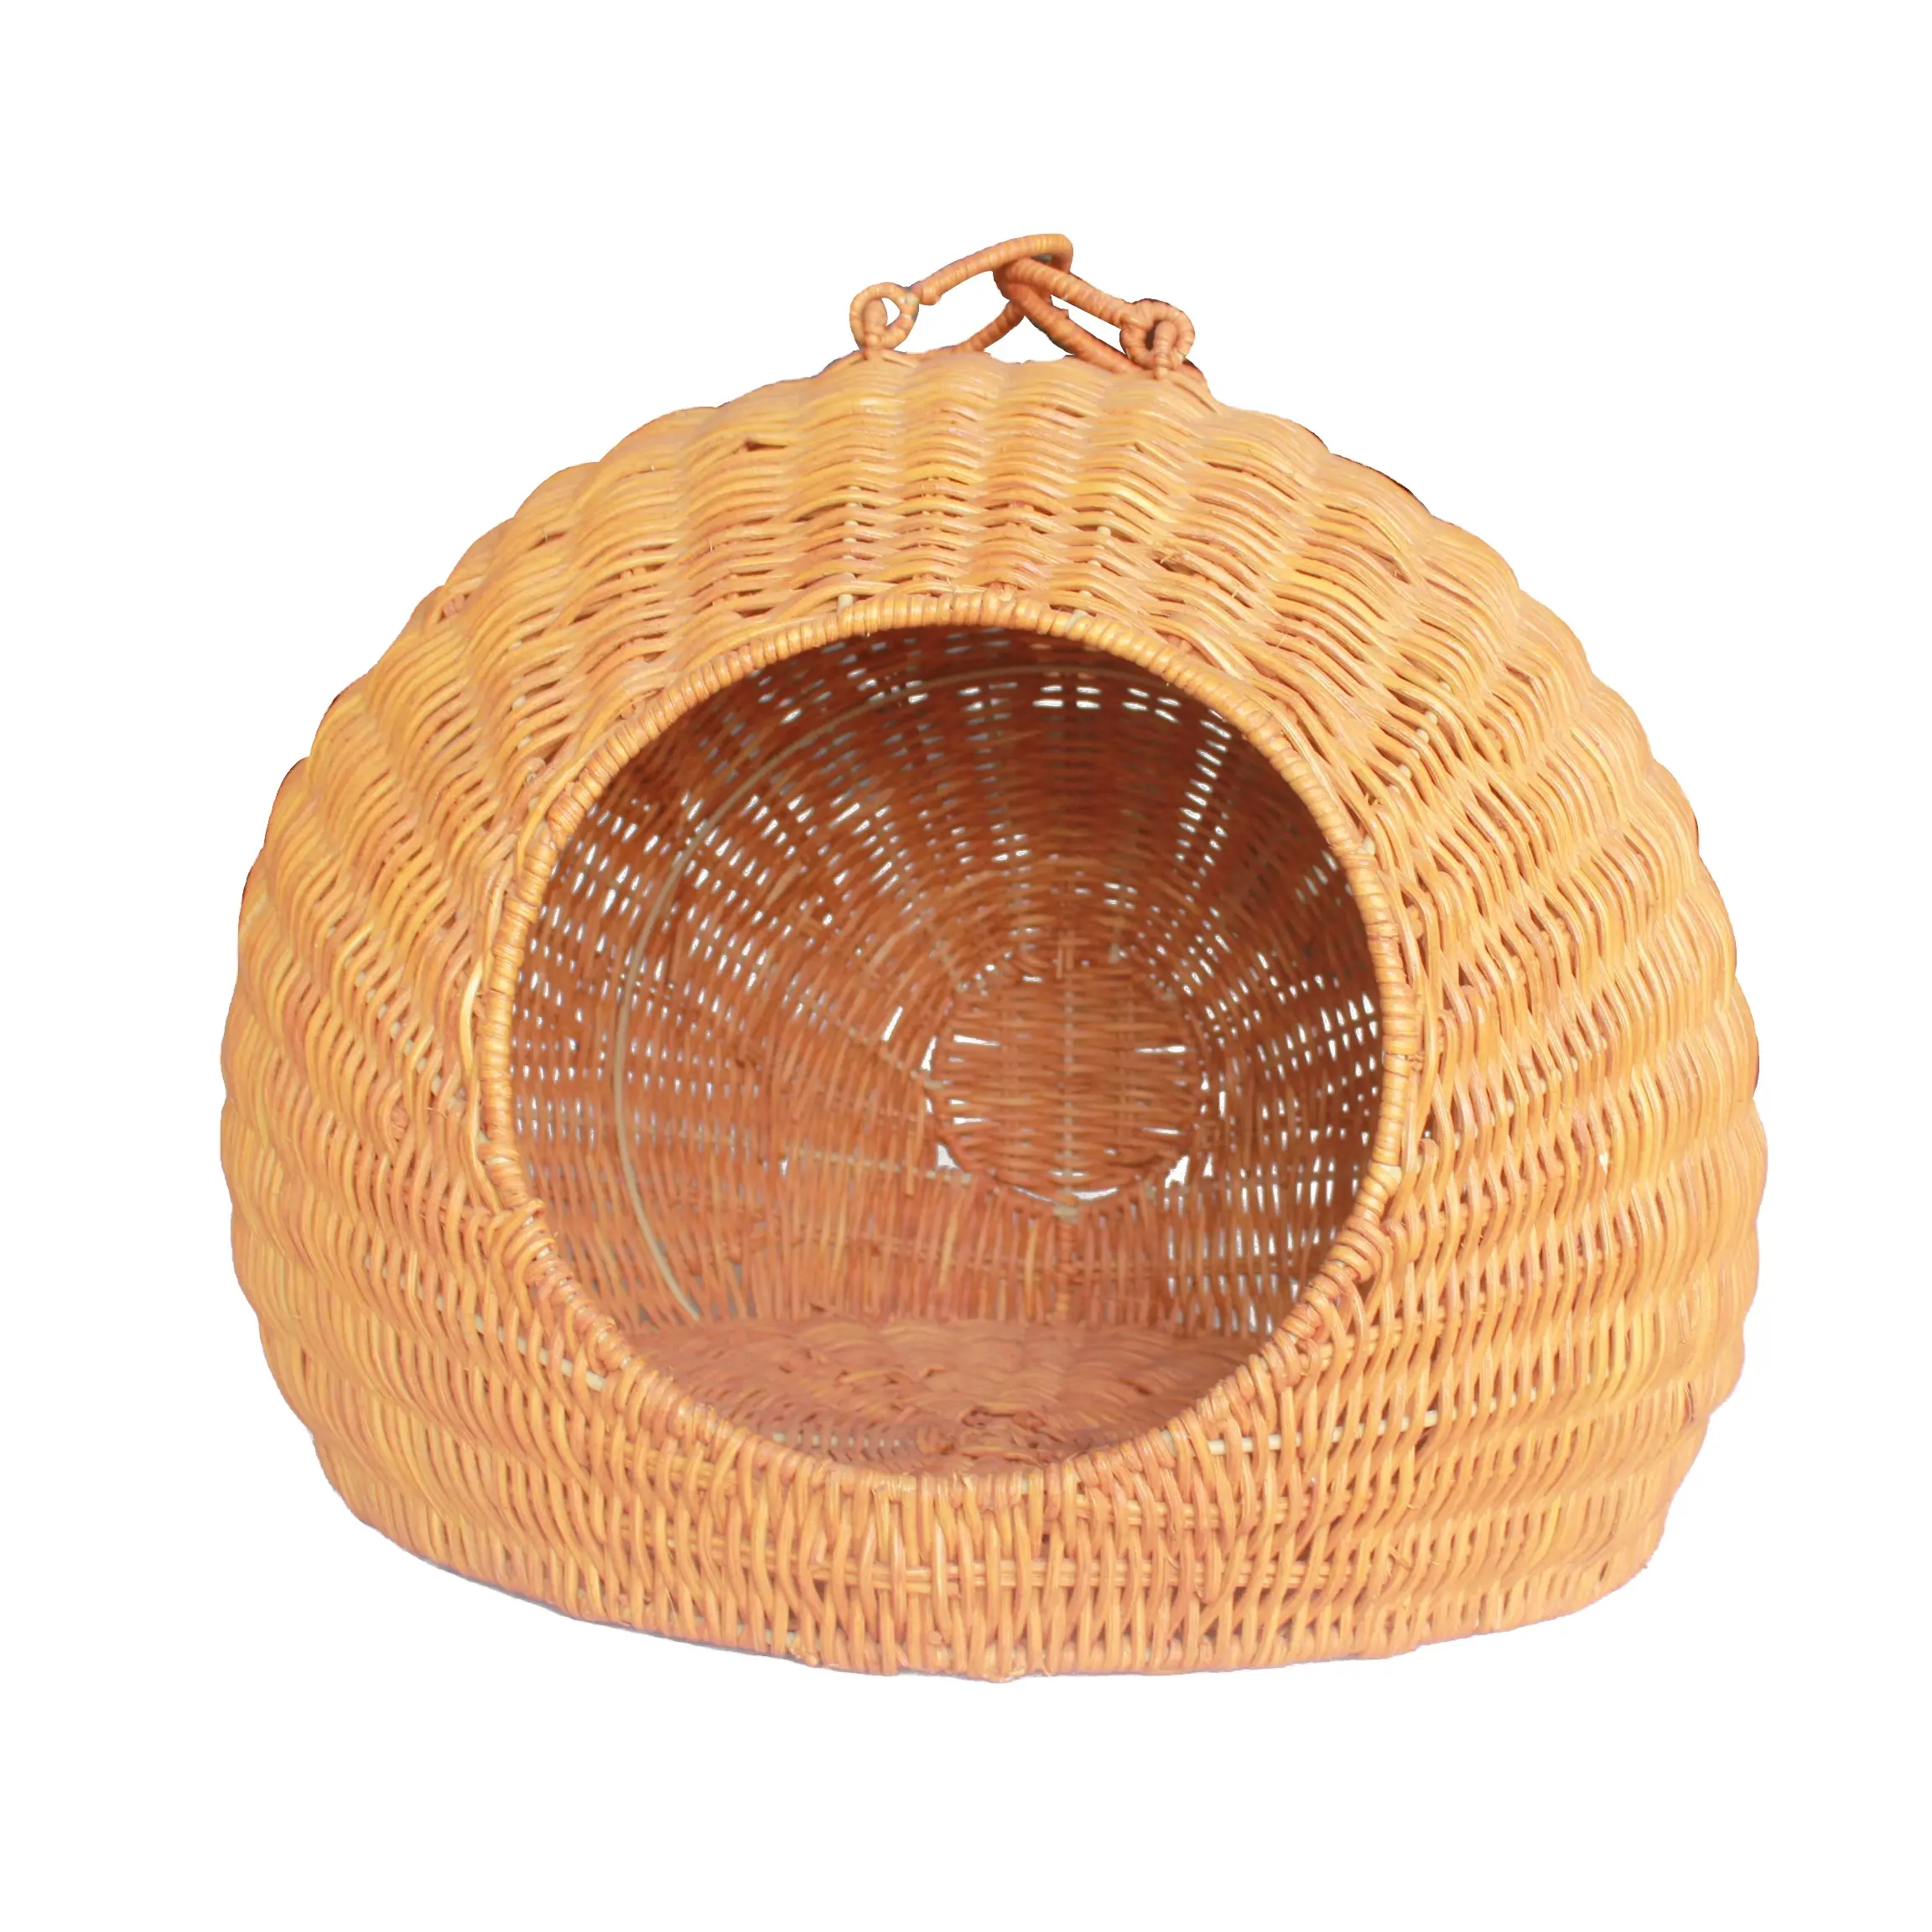 Natural Material Cat Bed/House, Handwoven Wicker House for Cat, Willow Basket for Cat Small Dog Wicker Pet Basket Cat Cave Pet